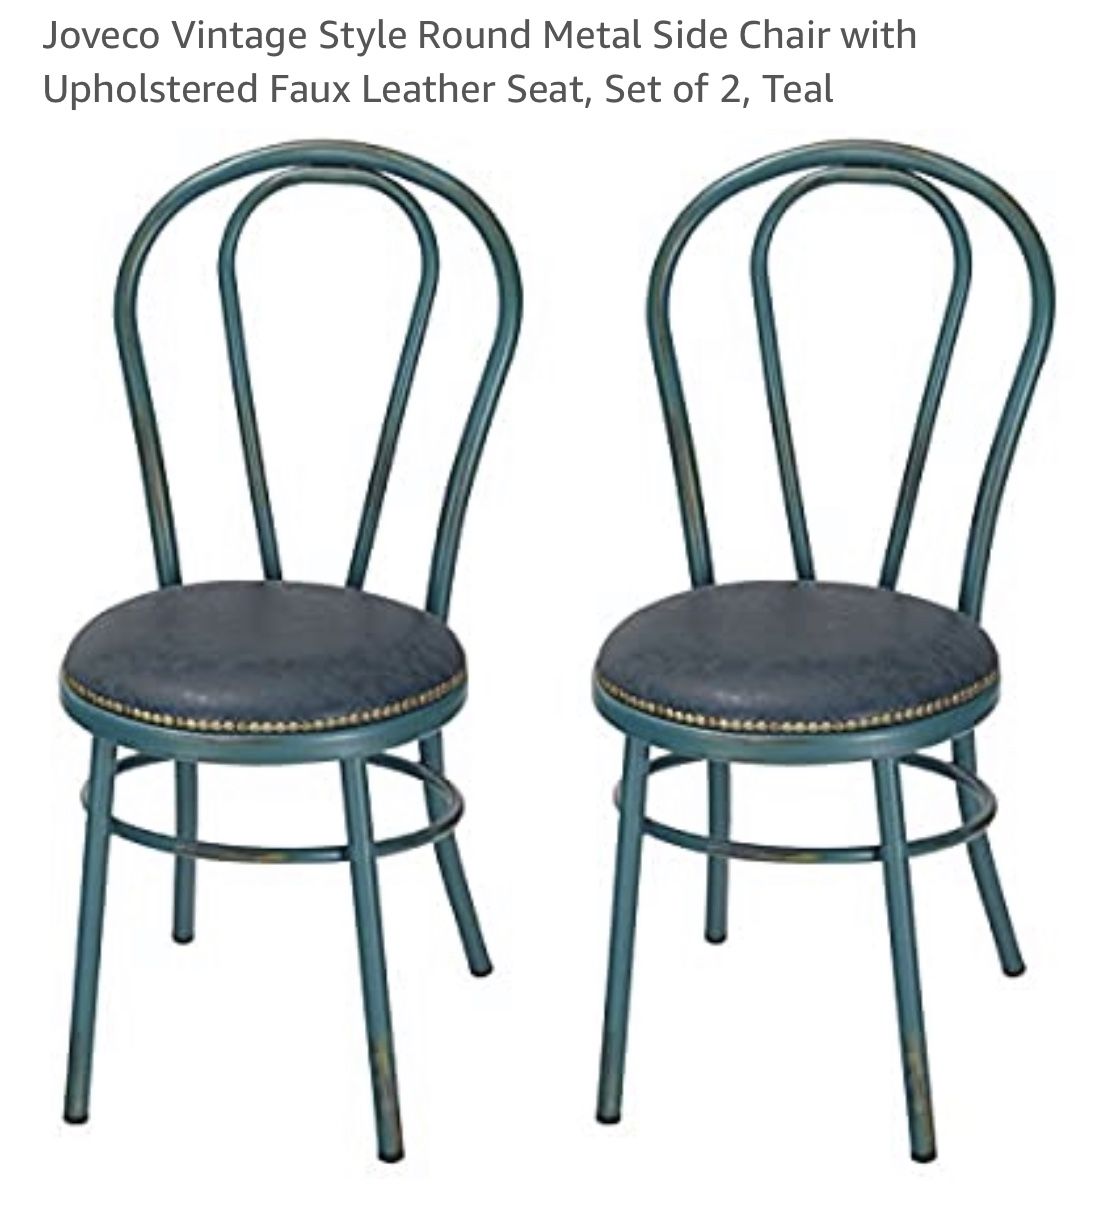 Vintage Style around Metal Side Chair with Upholstered Faux Leather Seat, set of 2, Teal